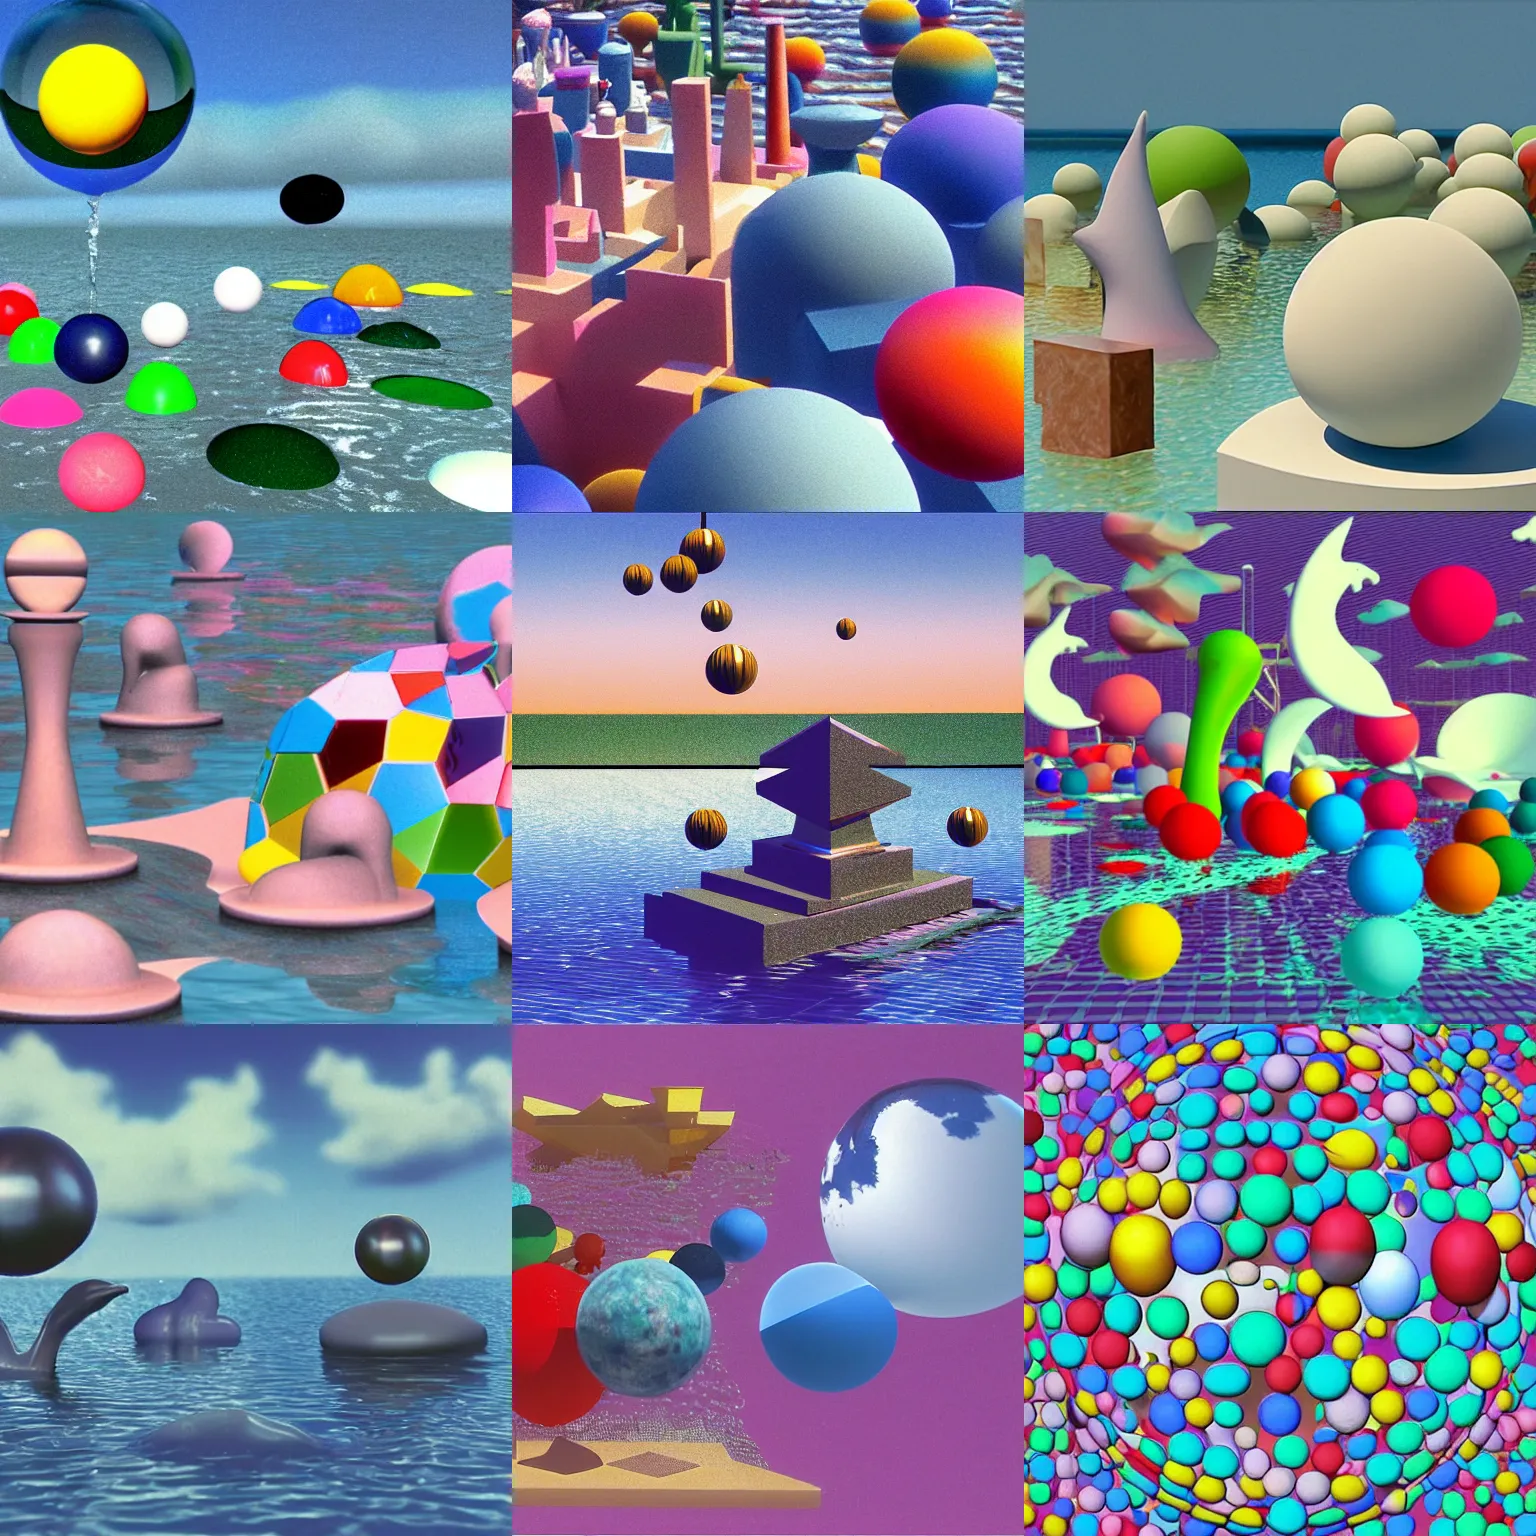 Prompt: still from a 1 9 8 3 3 d computer animation, constructive solid geometry, floating colorful geometric shapes and structures, spheres, statues, faces, water, glass, marble, chrome, stone, dolphins, clouds, vaporwave